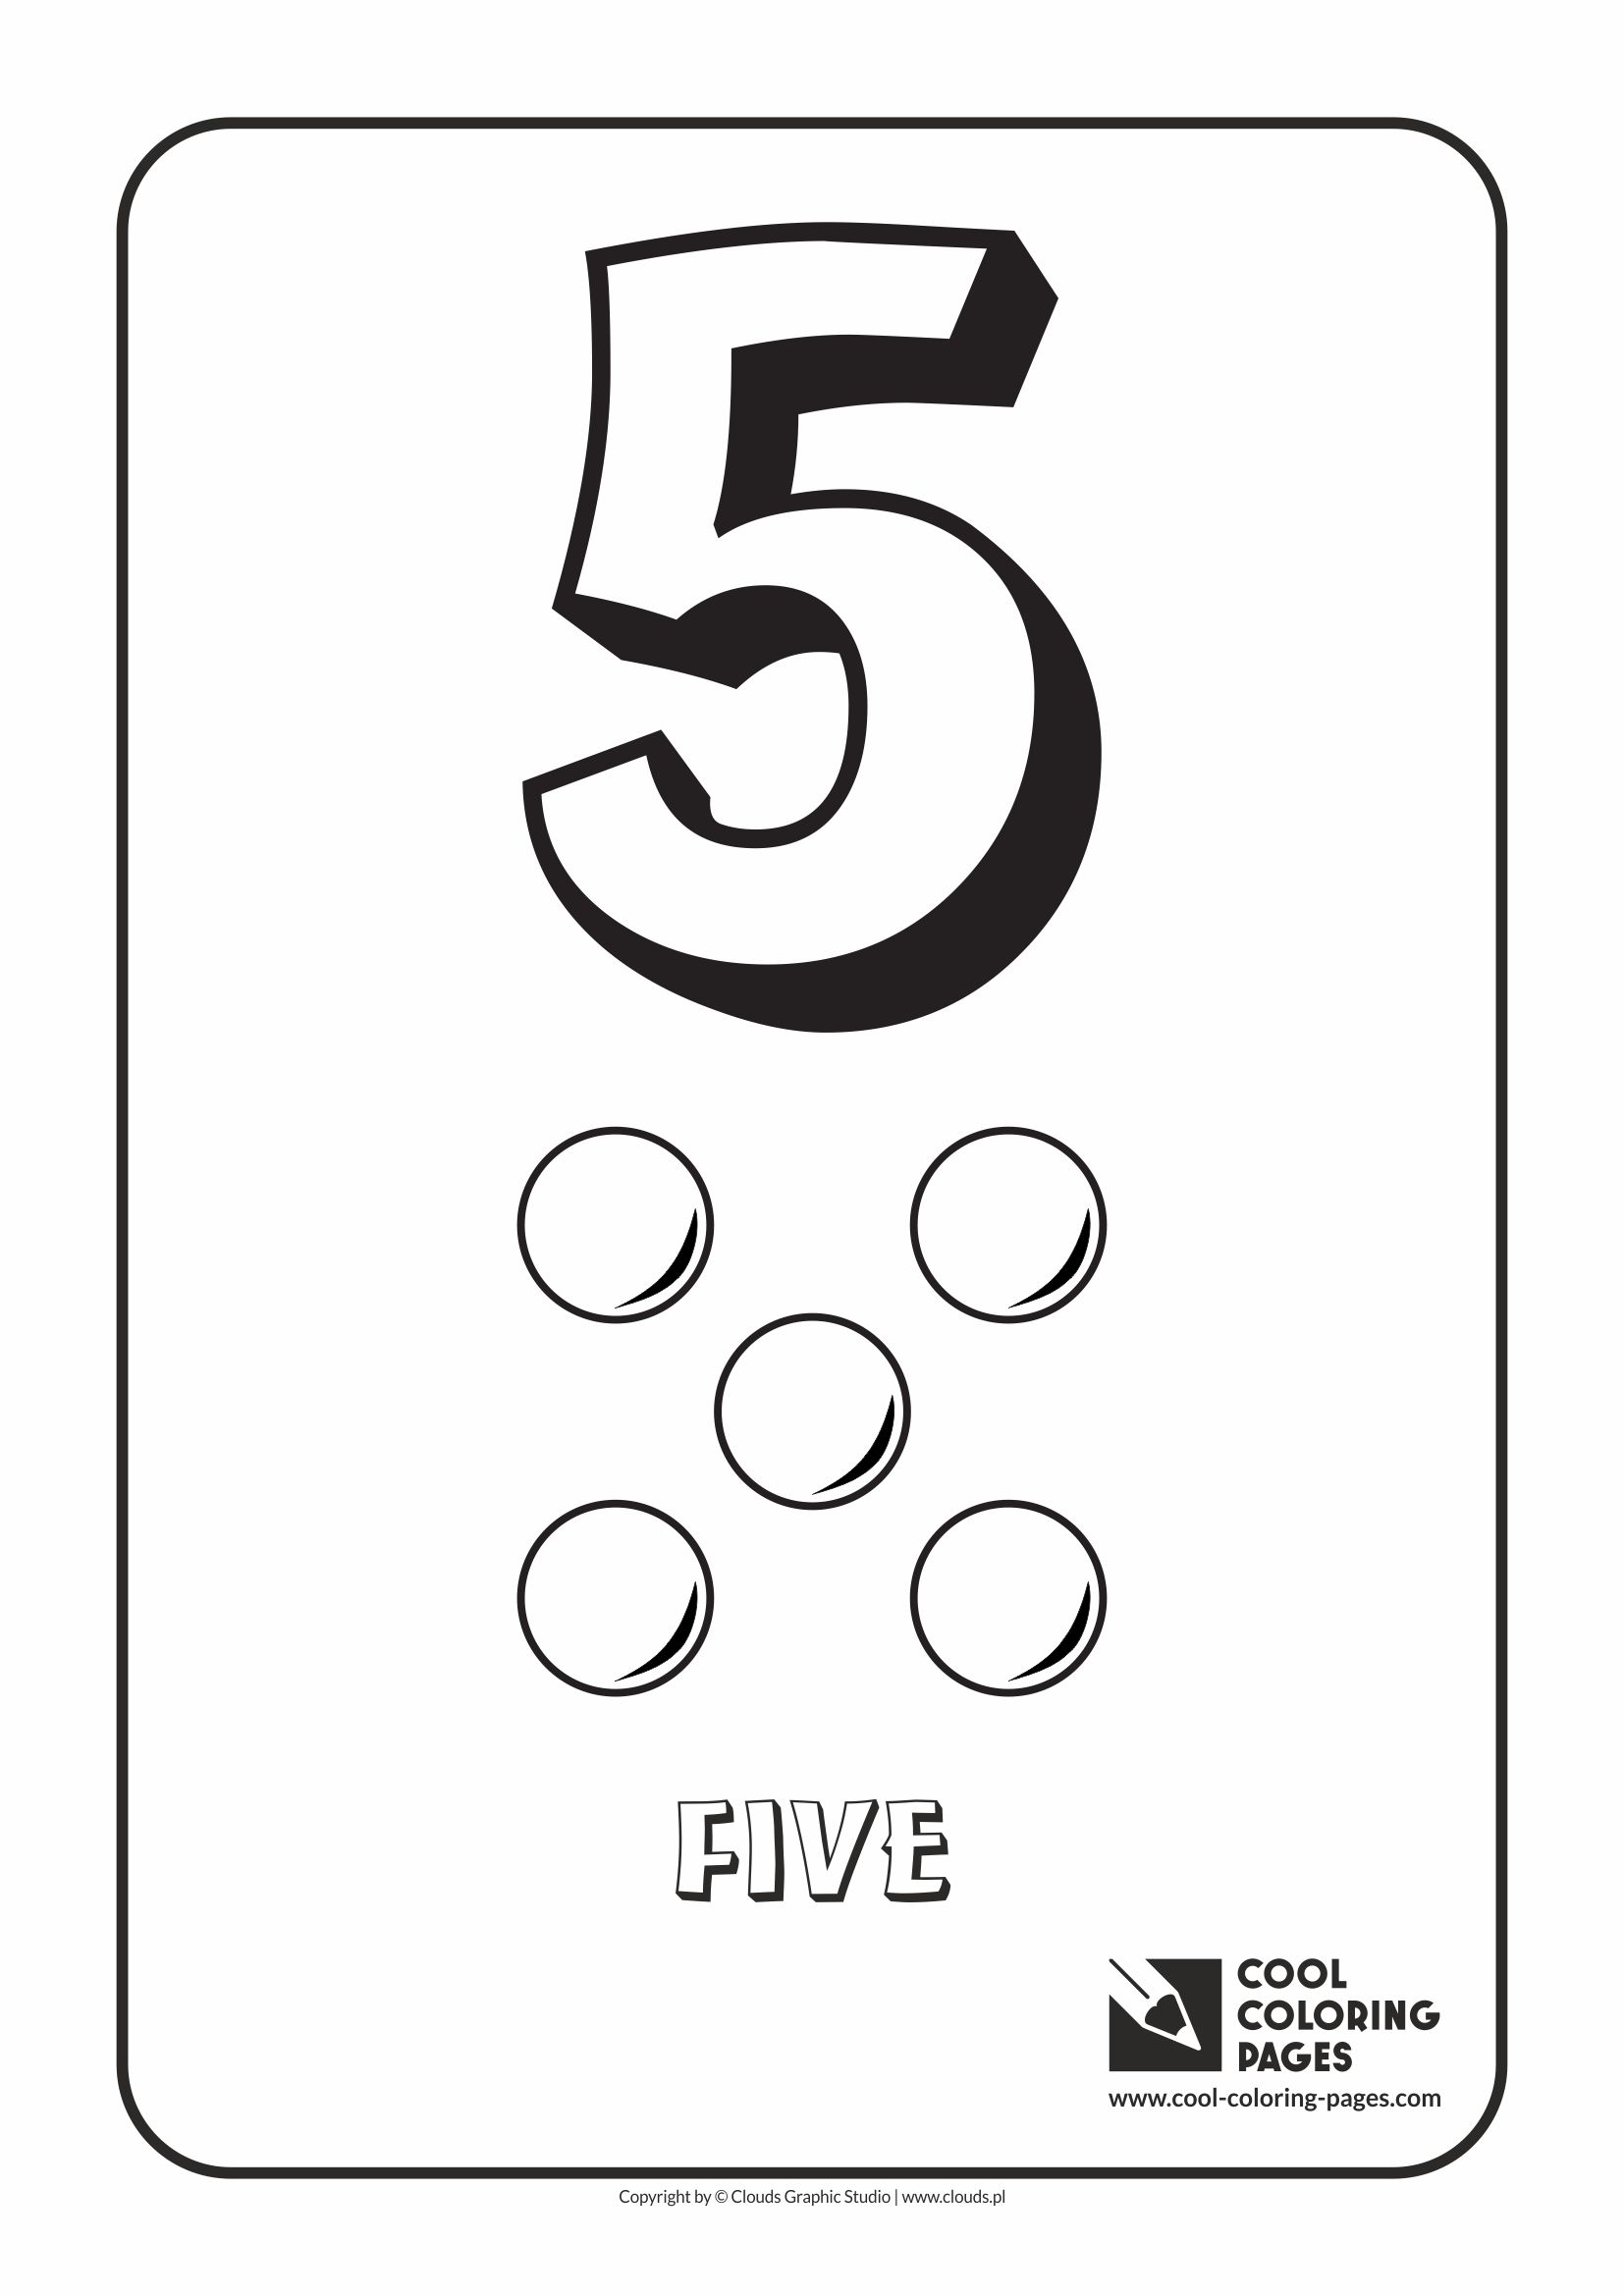 Cool Coloring Pages - Digits / Digit 5 / Coloring page with digit 5